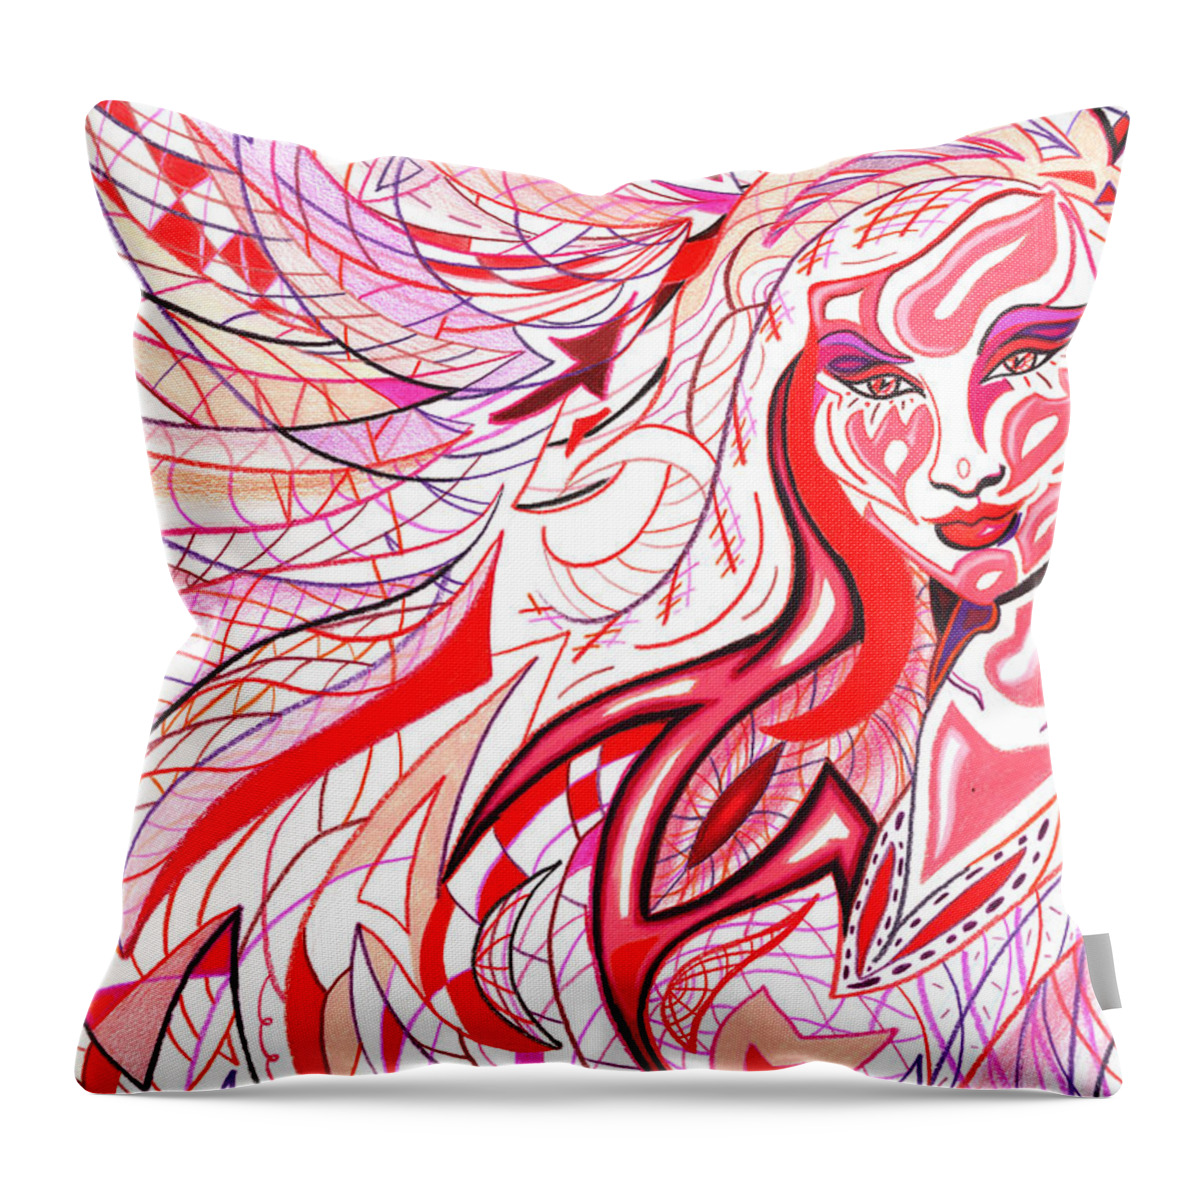 Lipstick Throw Pillow featuring the drawing Lipstick by Danielle R T Haney